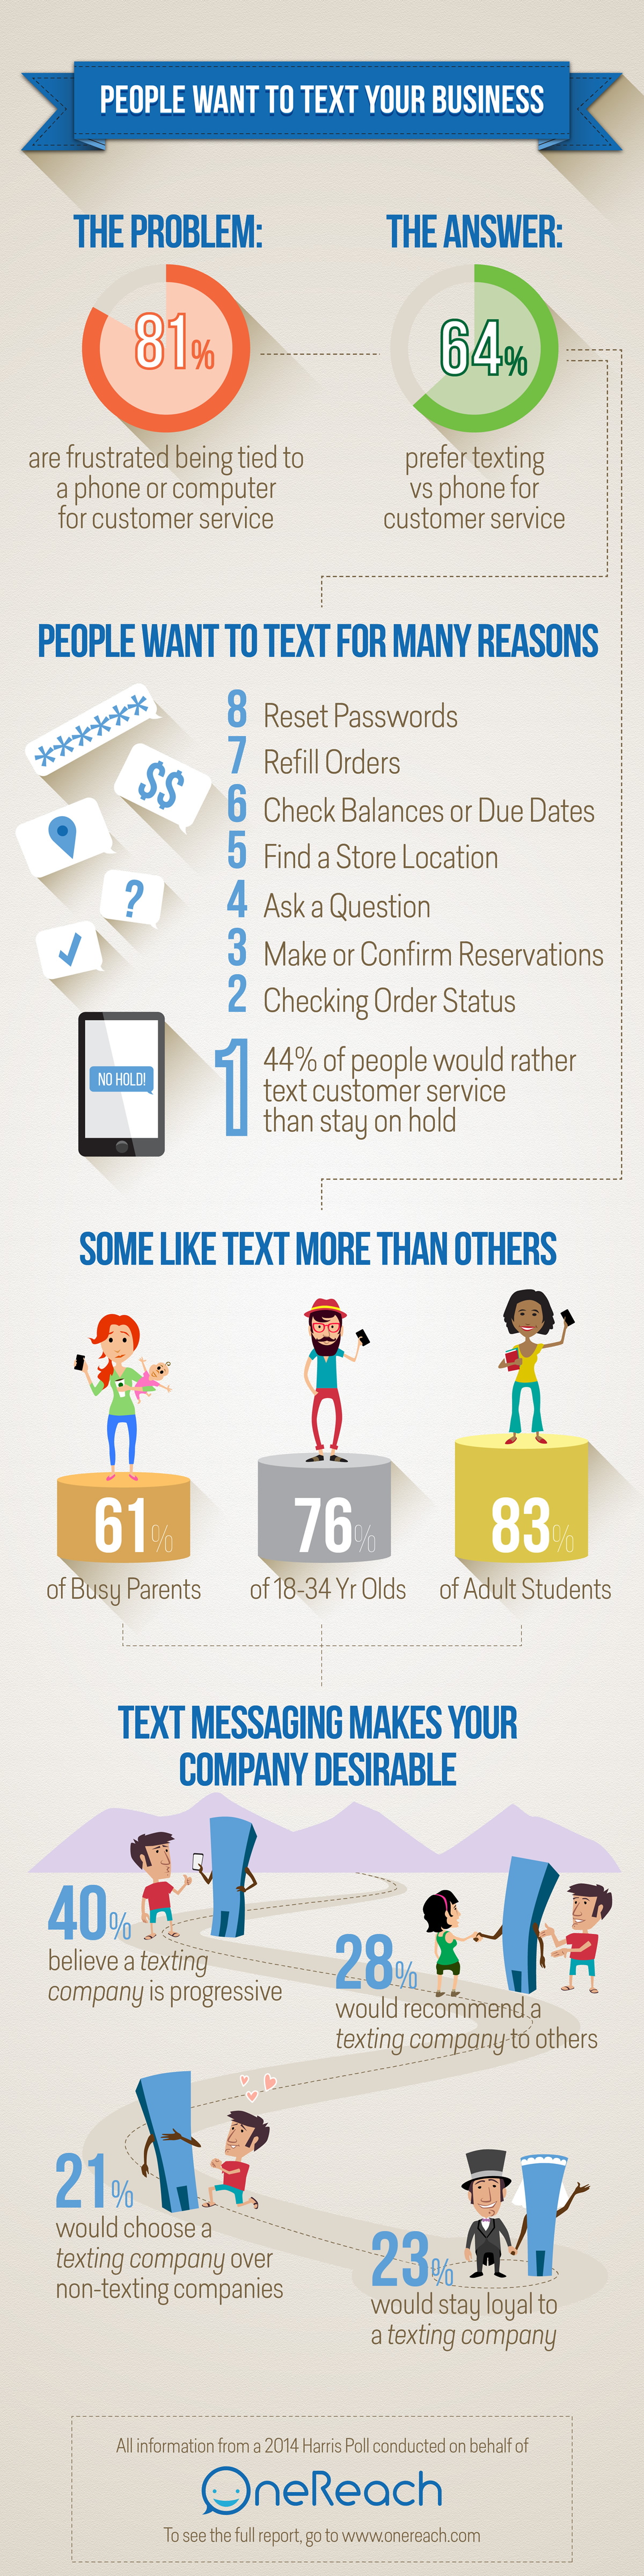 Infographic - People Want to Text Your Business - HiRes